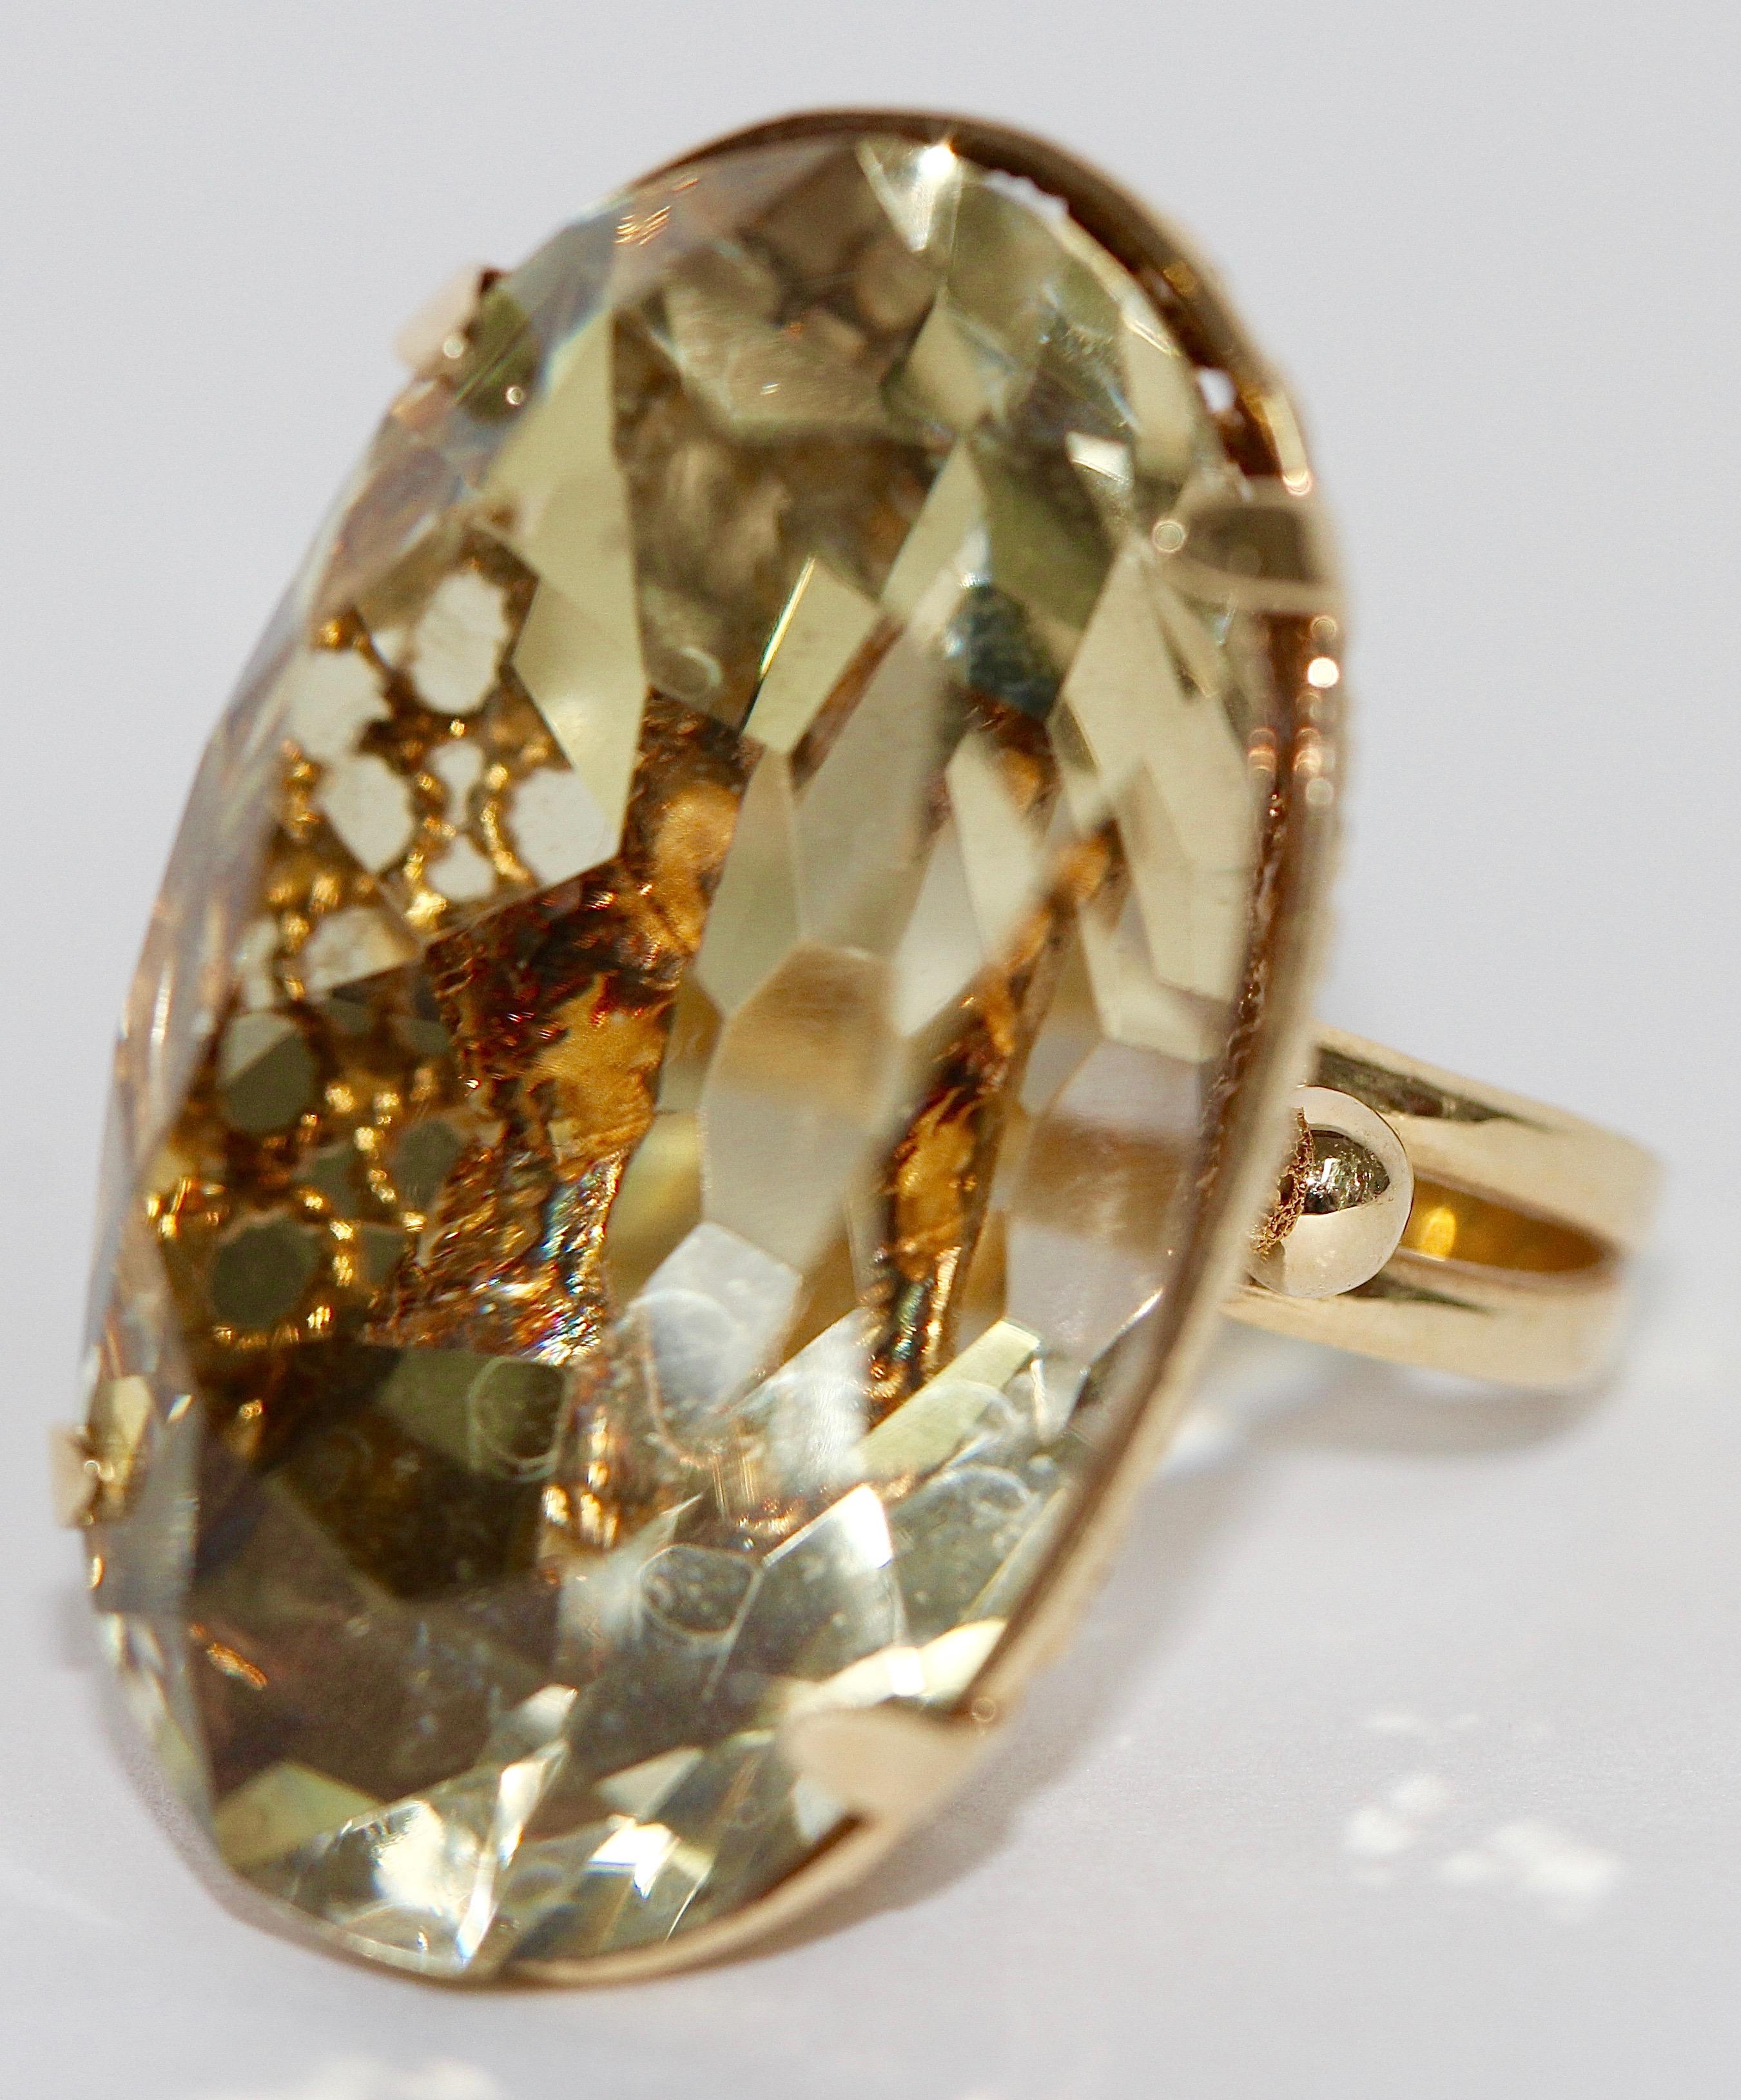 14k yellow gold ring with large, faceted, bright citrine.
Ring size (diameter) 17mm. Rather for petite fingers.